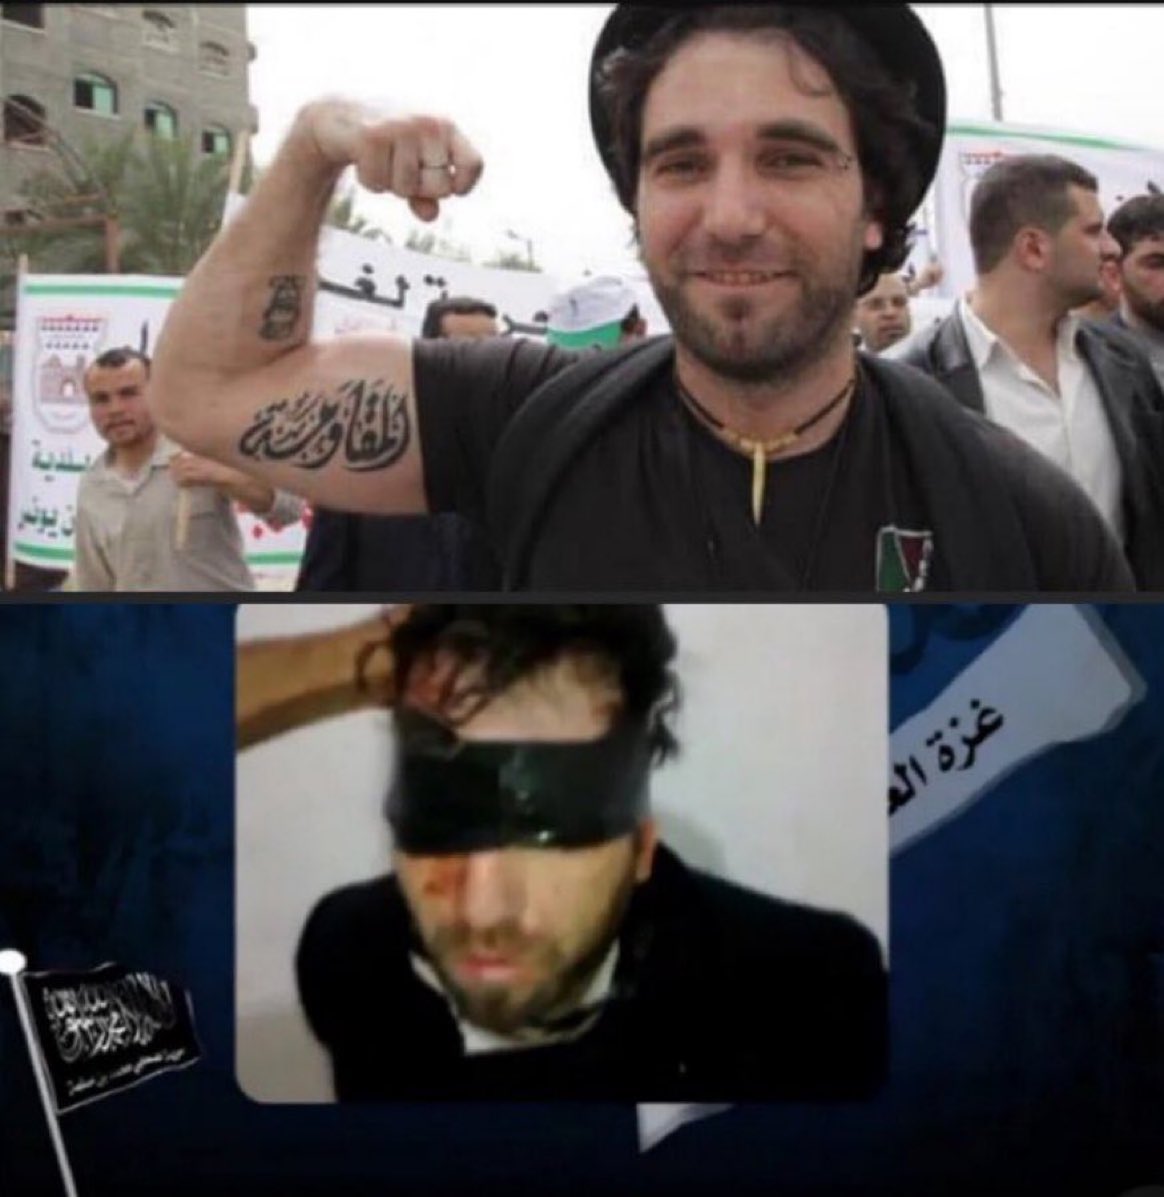 Vittorio Arrigoni was an Italian journalist and pro-Palestine activist. In 2008, he moved to Gaza to support Palestinians. He often received death threats, but ignored them. He claimed it was just the Mossad trying to scare him off. In 2011, he was kidnapped, tortured and